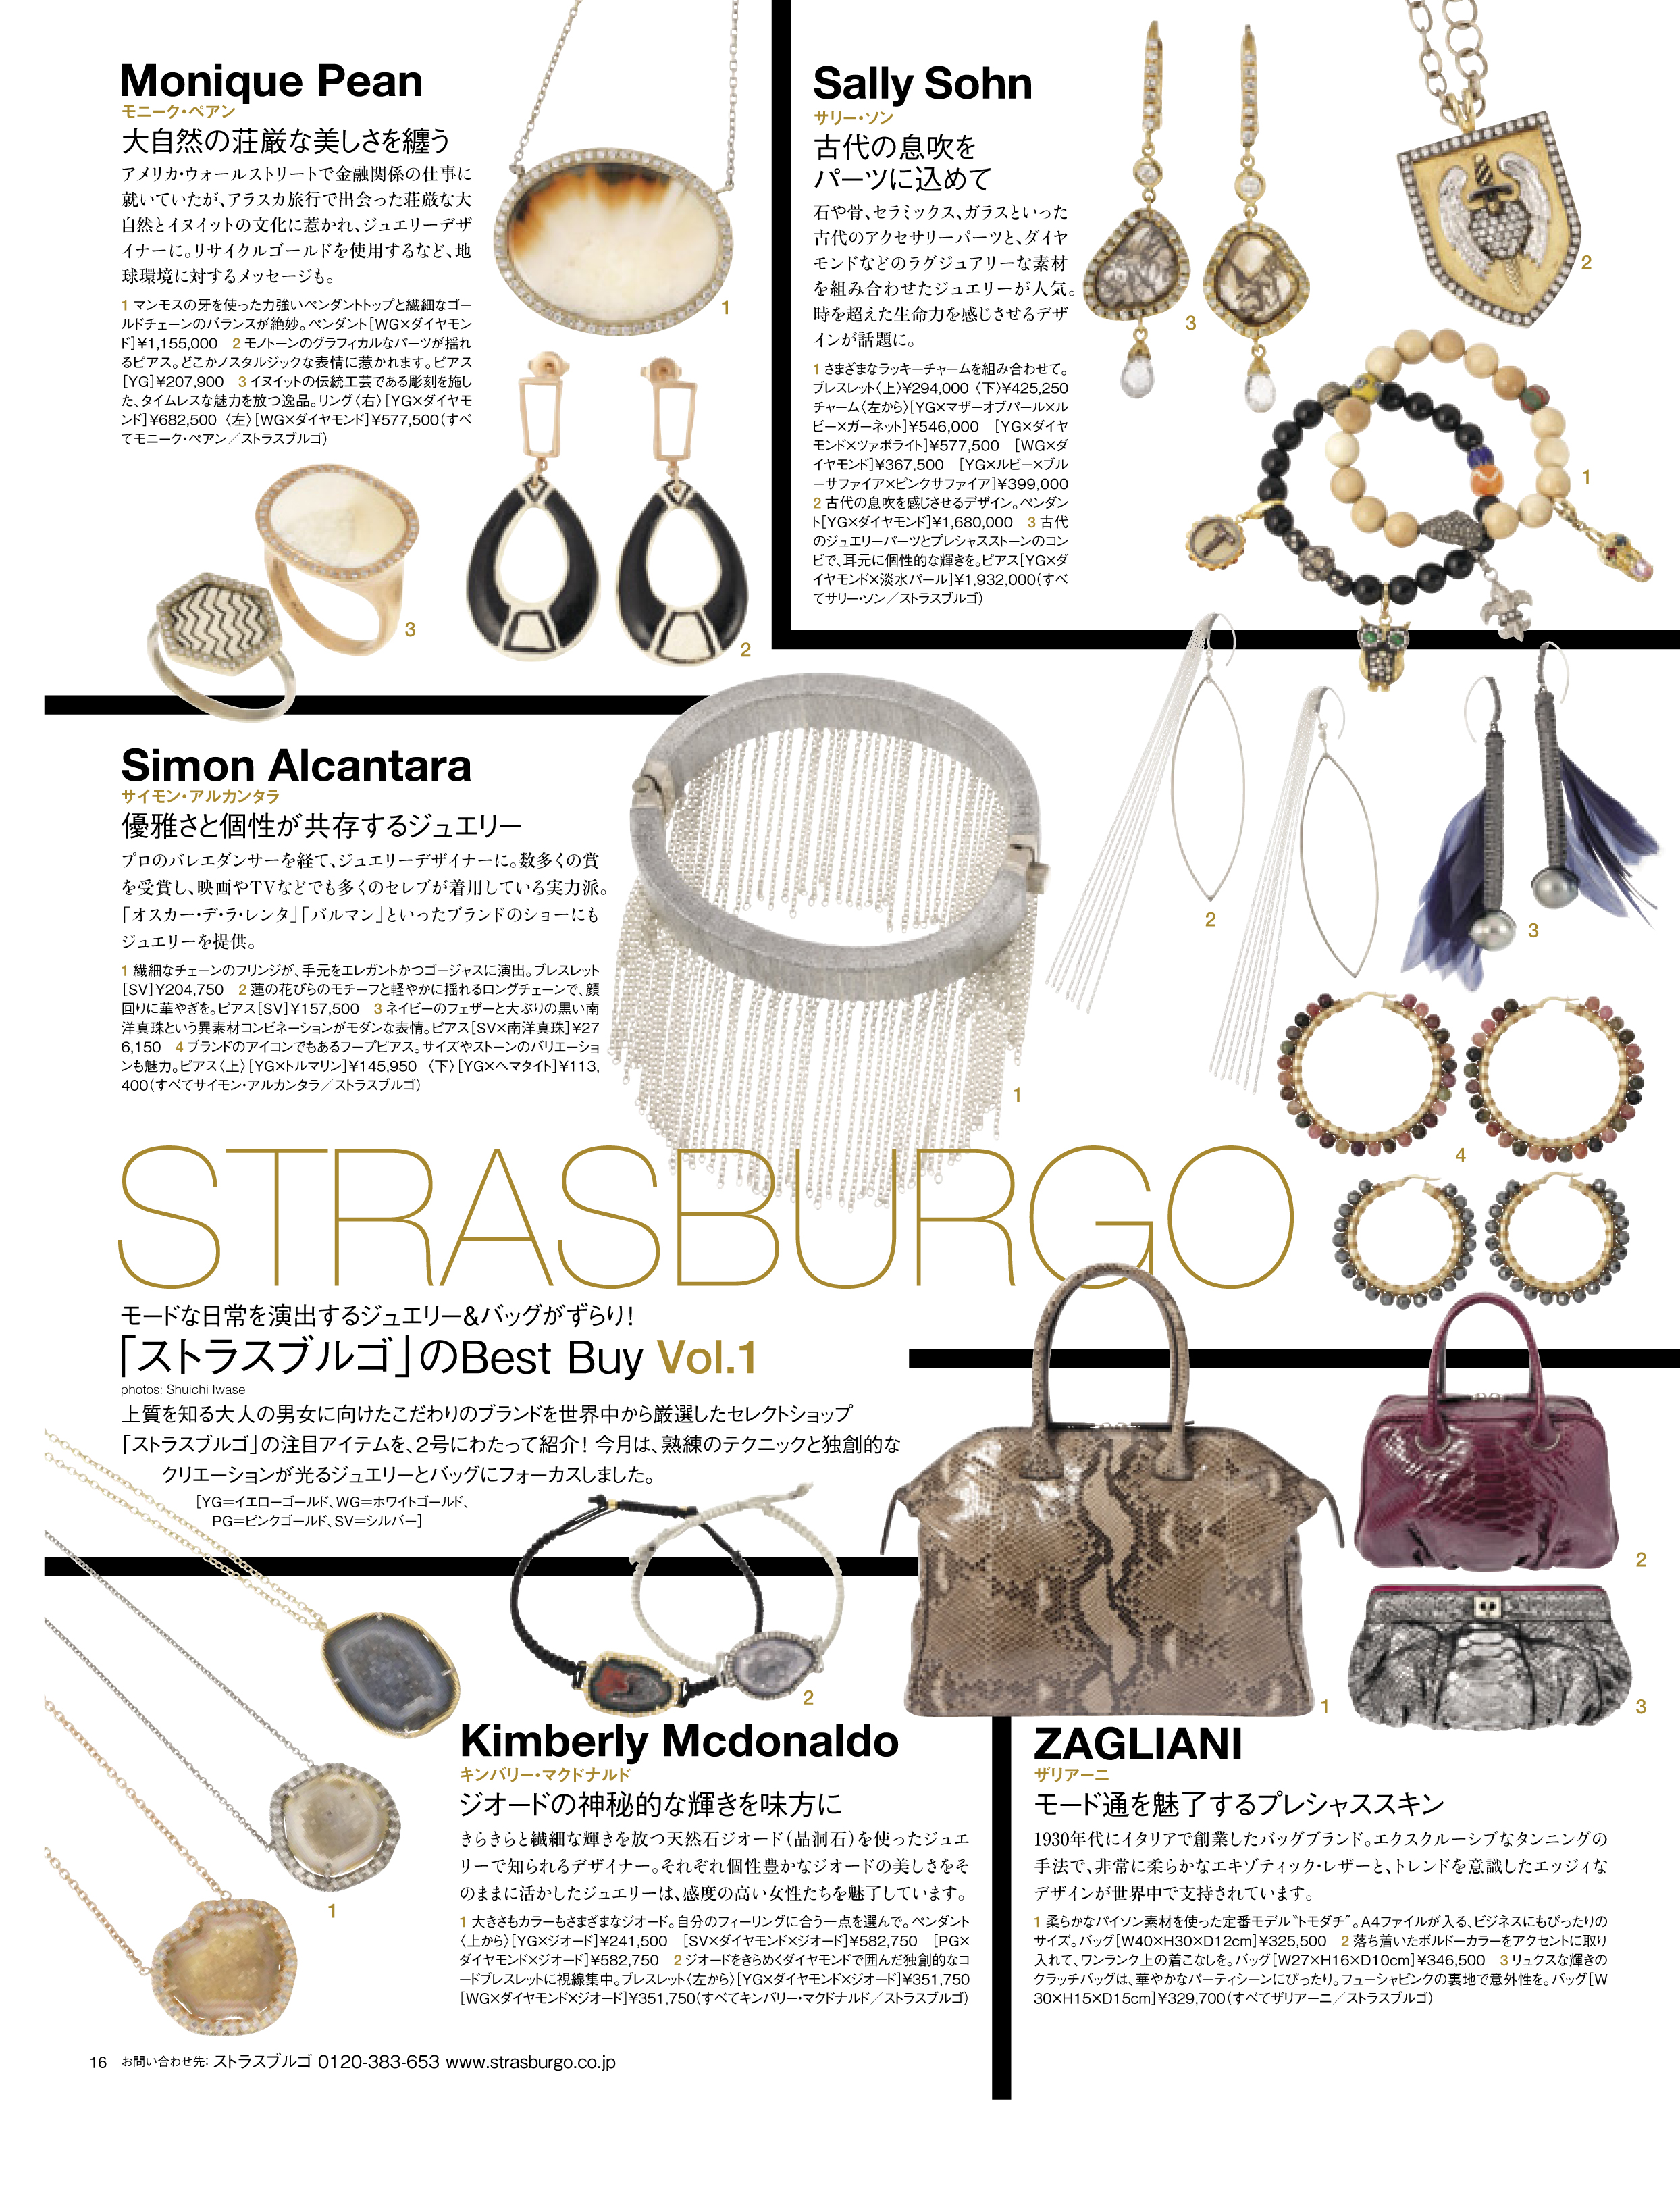 JAPAN MARIE CLAIRE STYLE DECEMBER 2012.  TO PURCHASE THE SIMON ALCANTARA’S JEWELRY IN JAPAN PLEASE FOLLLOW THIS LINK Strasburgo